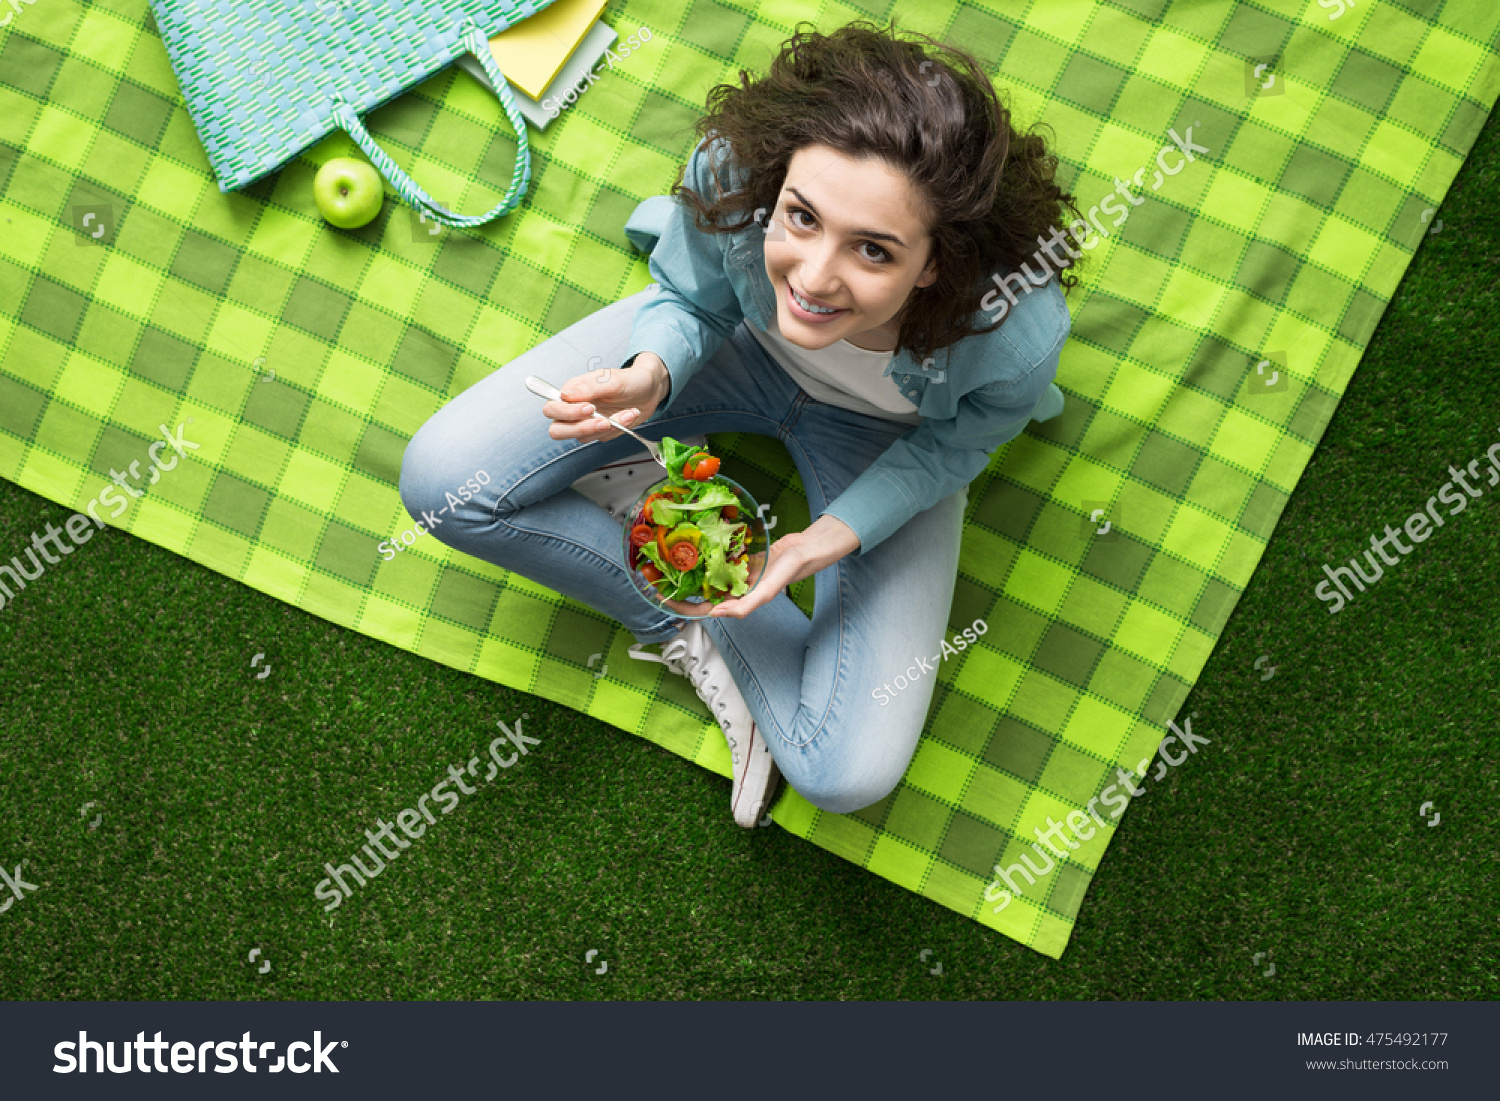 Smiling woman having a relaxing lunch break outdoors, she is sitting on the grass and eating a salad bowl #475492177